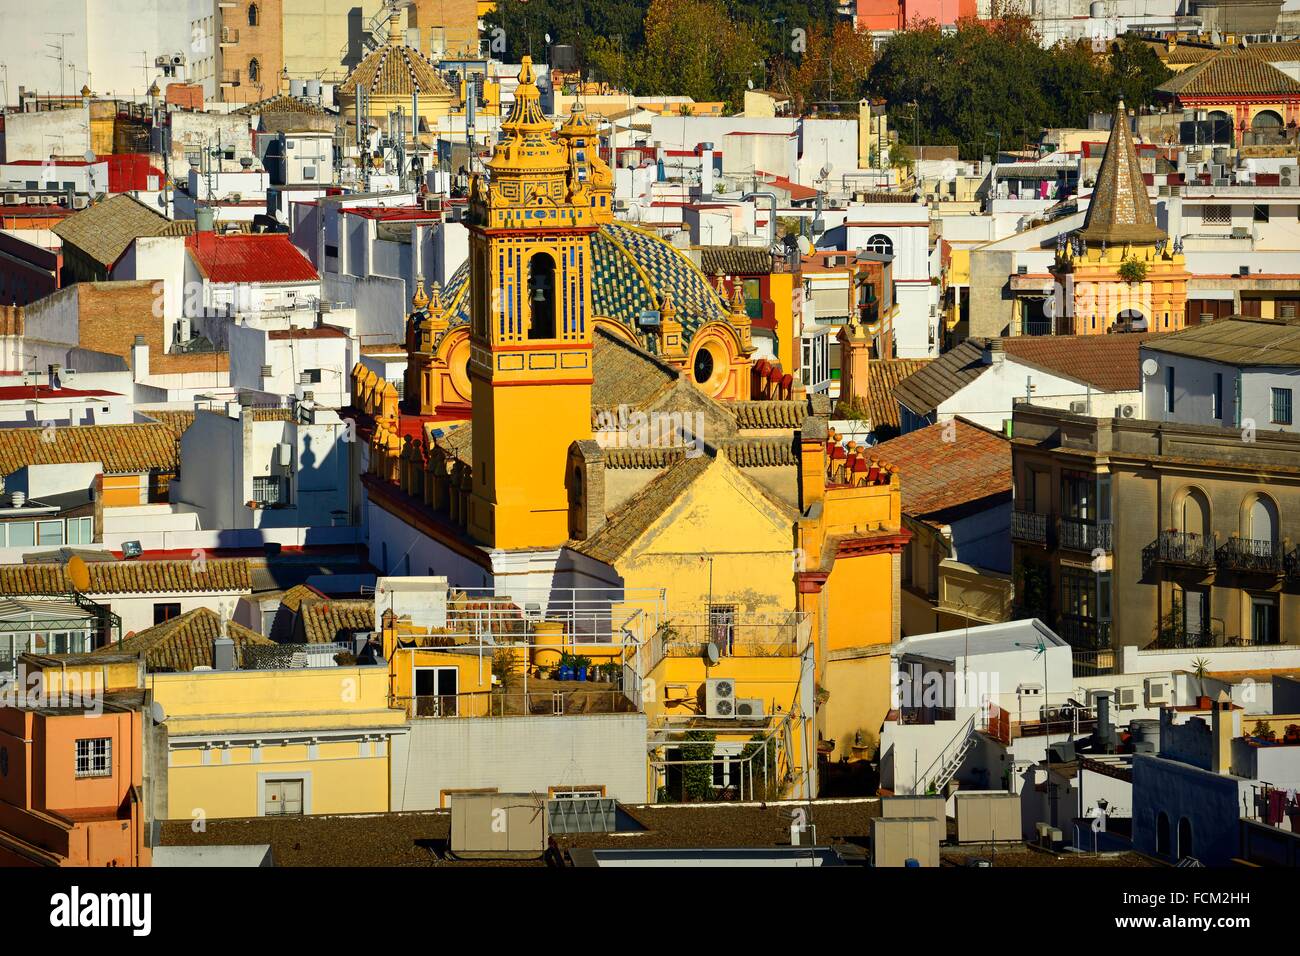 Panoramic view on the city of Seville, andalusia, Spain. Stock Photo